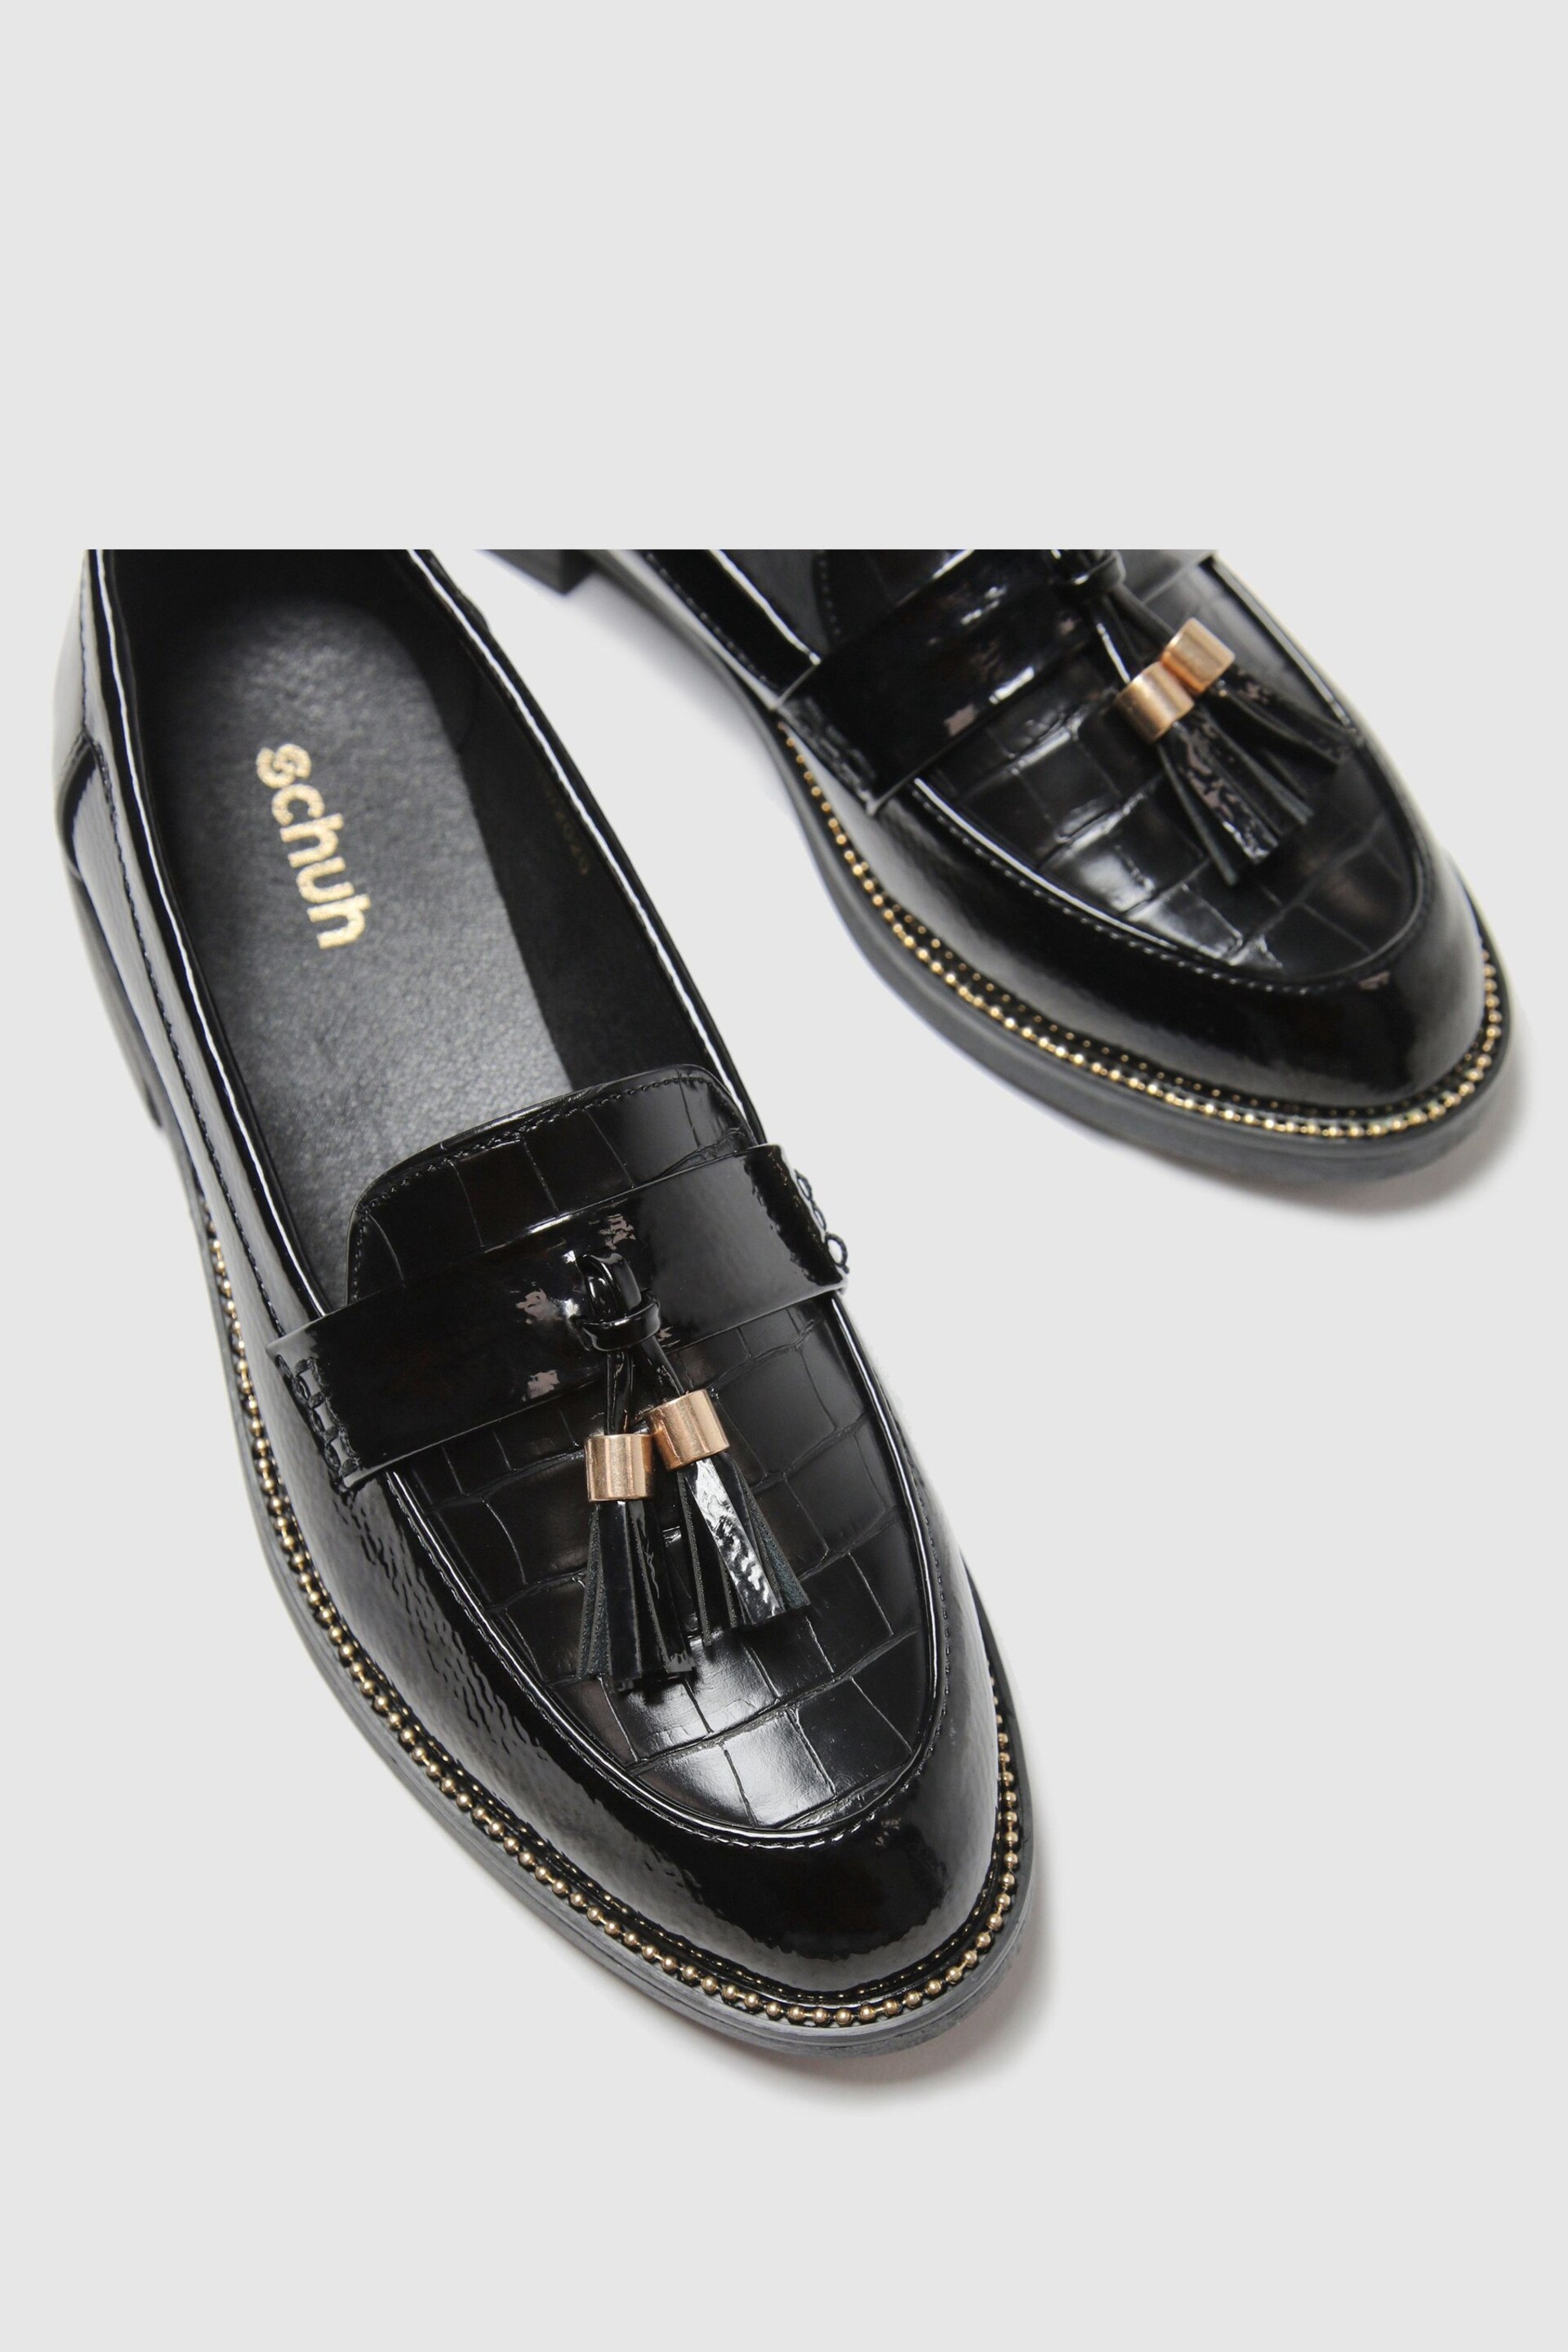 Schuh Lailah Croc Trassel Loafers - Image 4 of 4